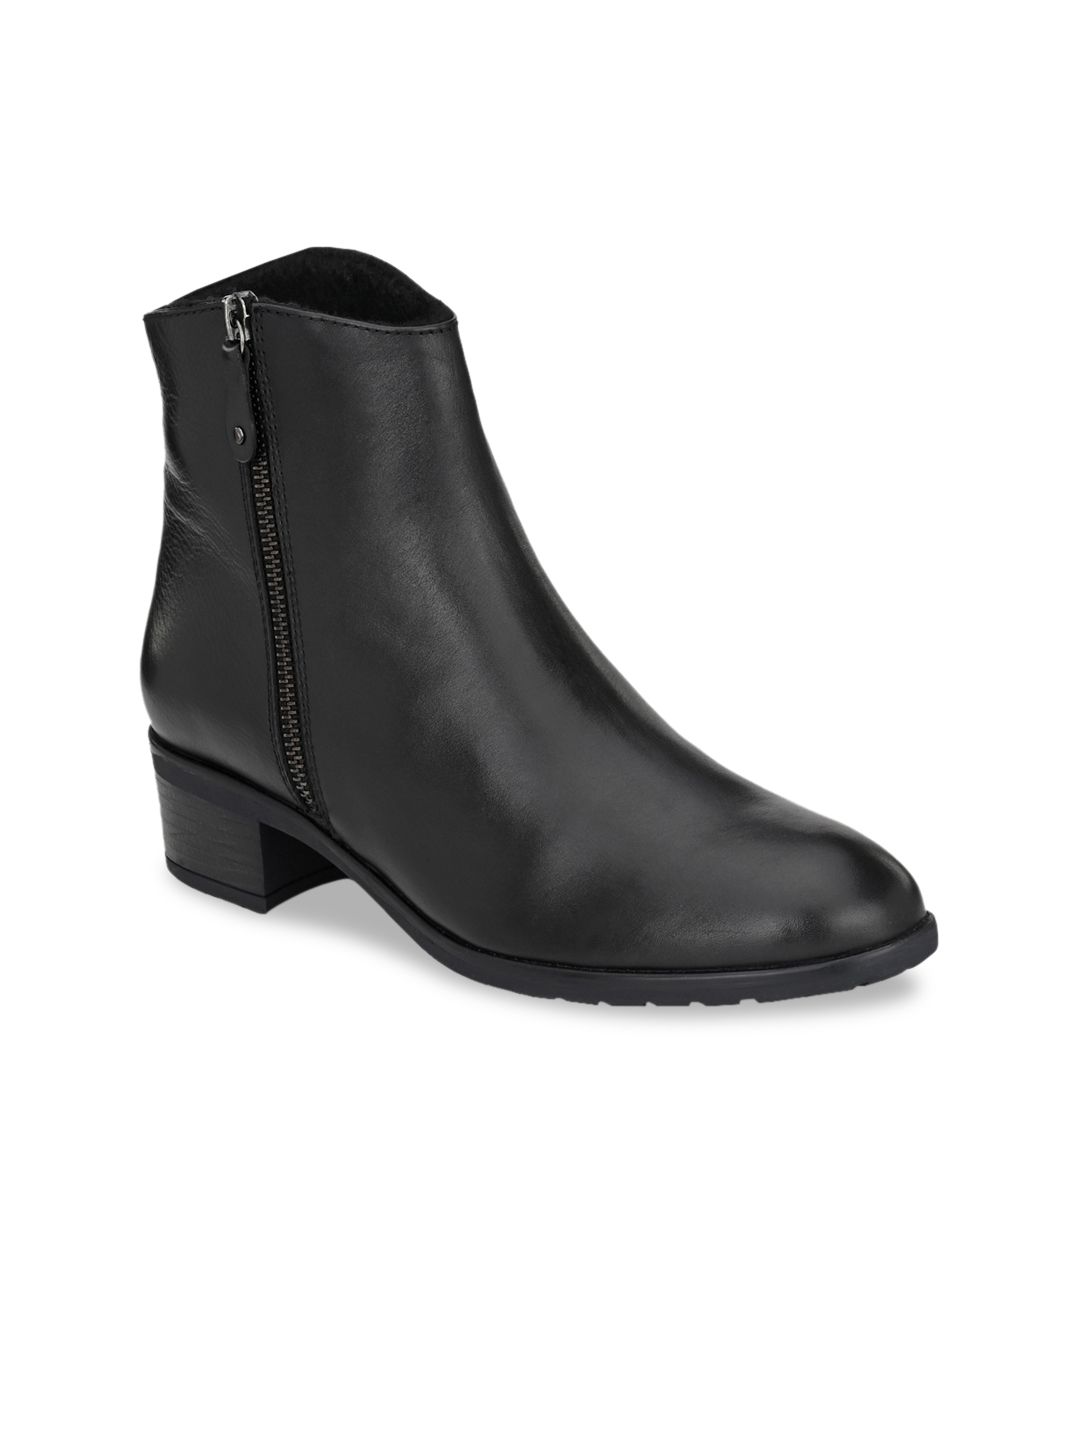 Delize Women Black Solid High-Top Faux Leather Heeled Boots Price in India